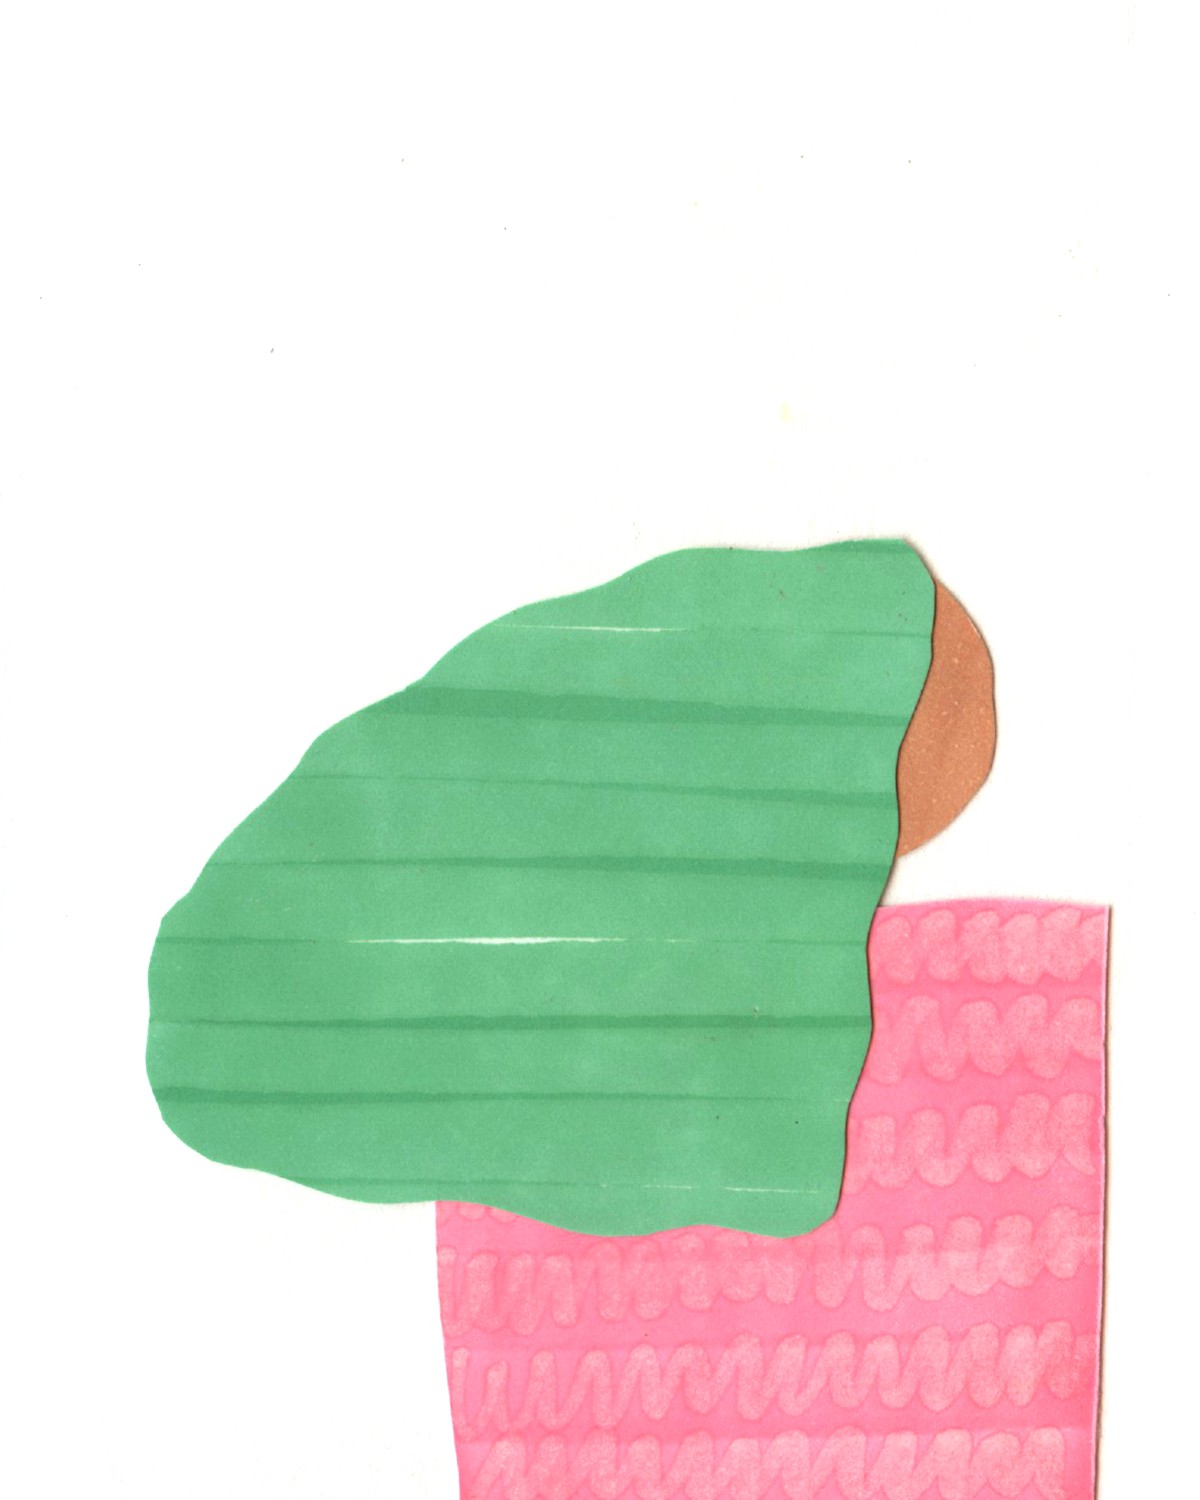 Collage with basic pink/brown/green shapes that illustrate girl with back towards viewer.  